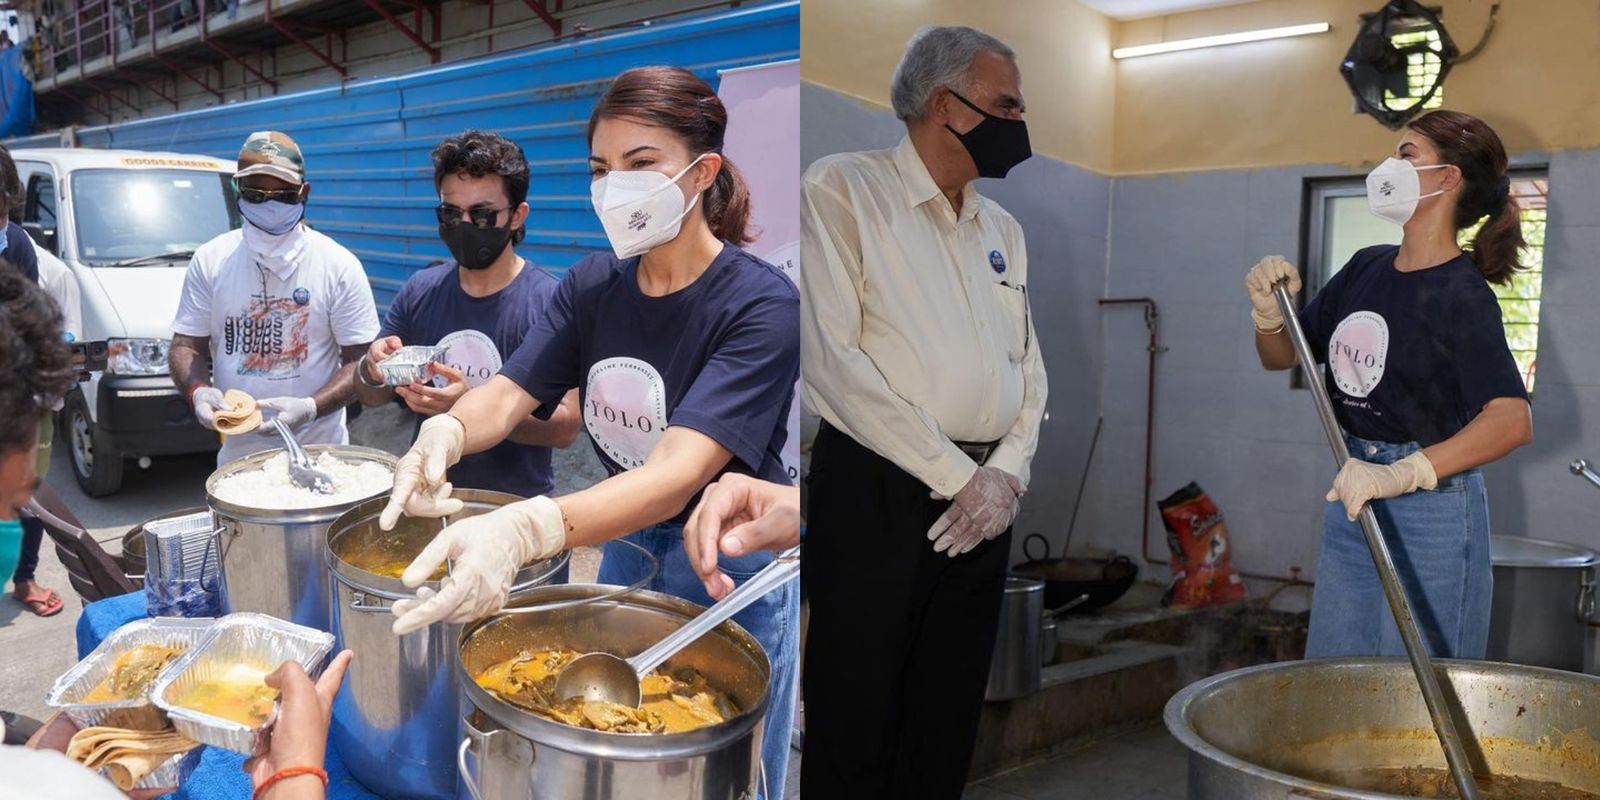 Jacqueline Fernandez Cooks & Distributes Meals To The Hungry In Mumbai Working With The Roti Bank: 'Honored To Be Of Help'